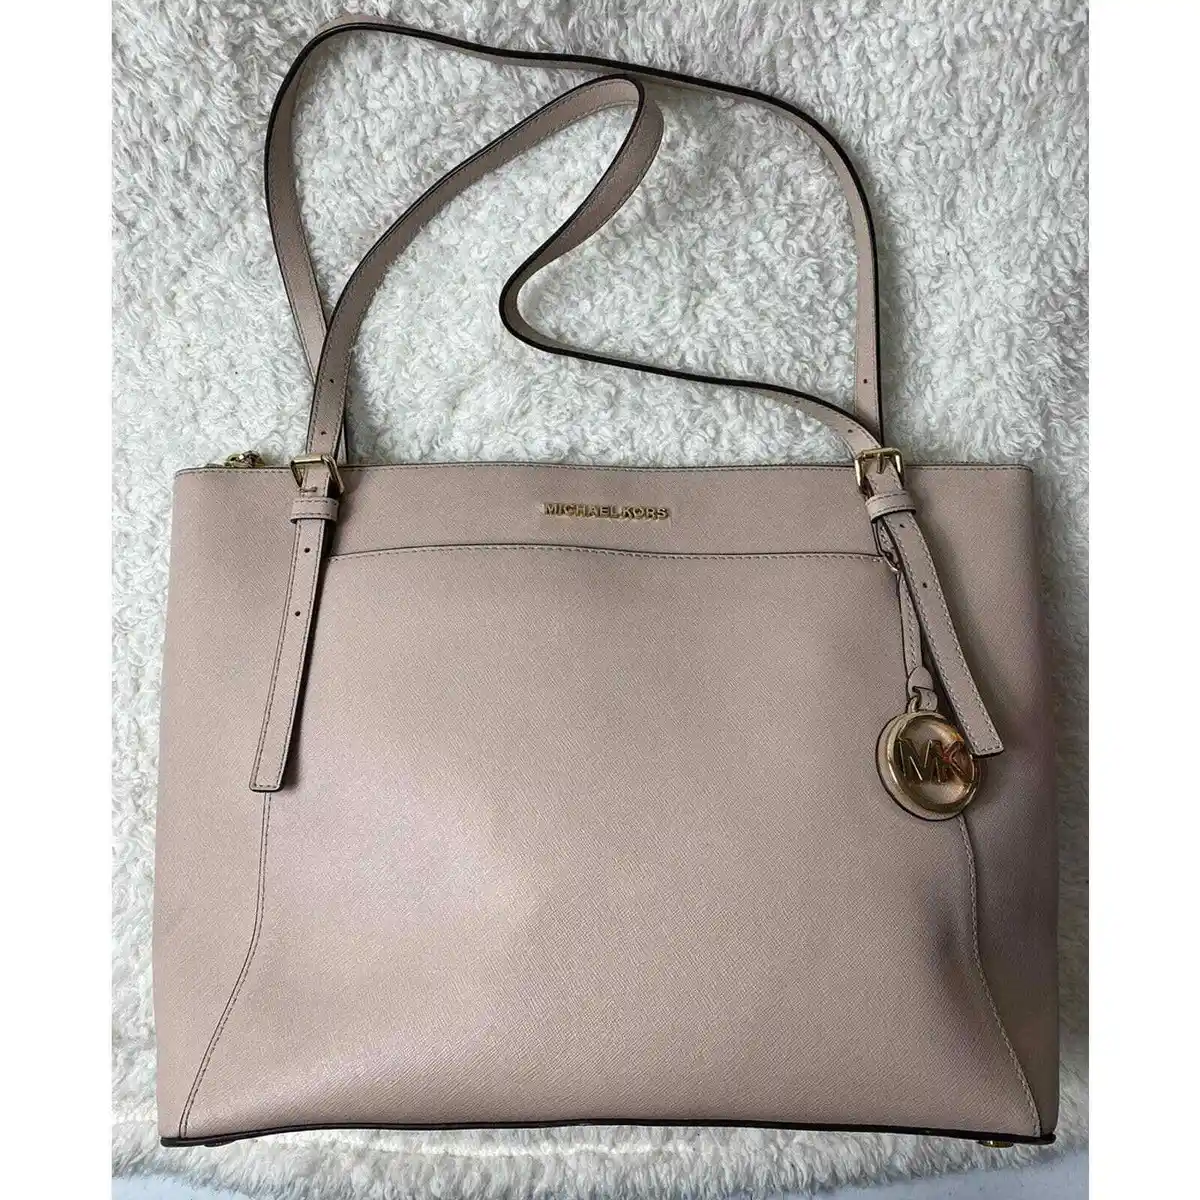 Michael Kors Voyager Large Saffiano Leather Top Zip Tote Bag Soft